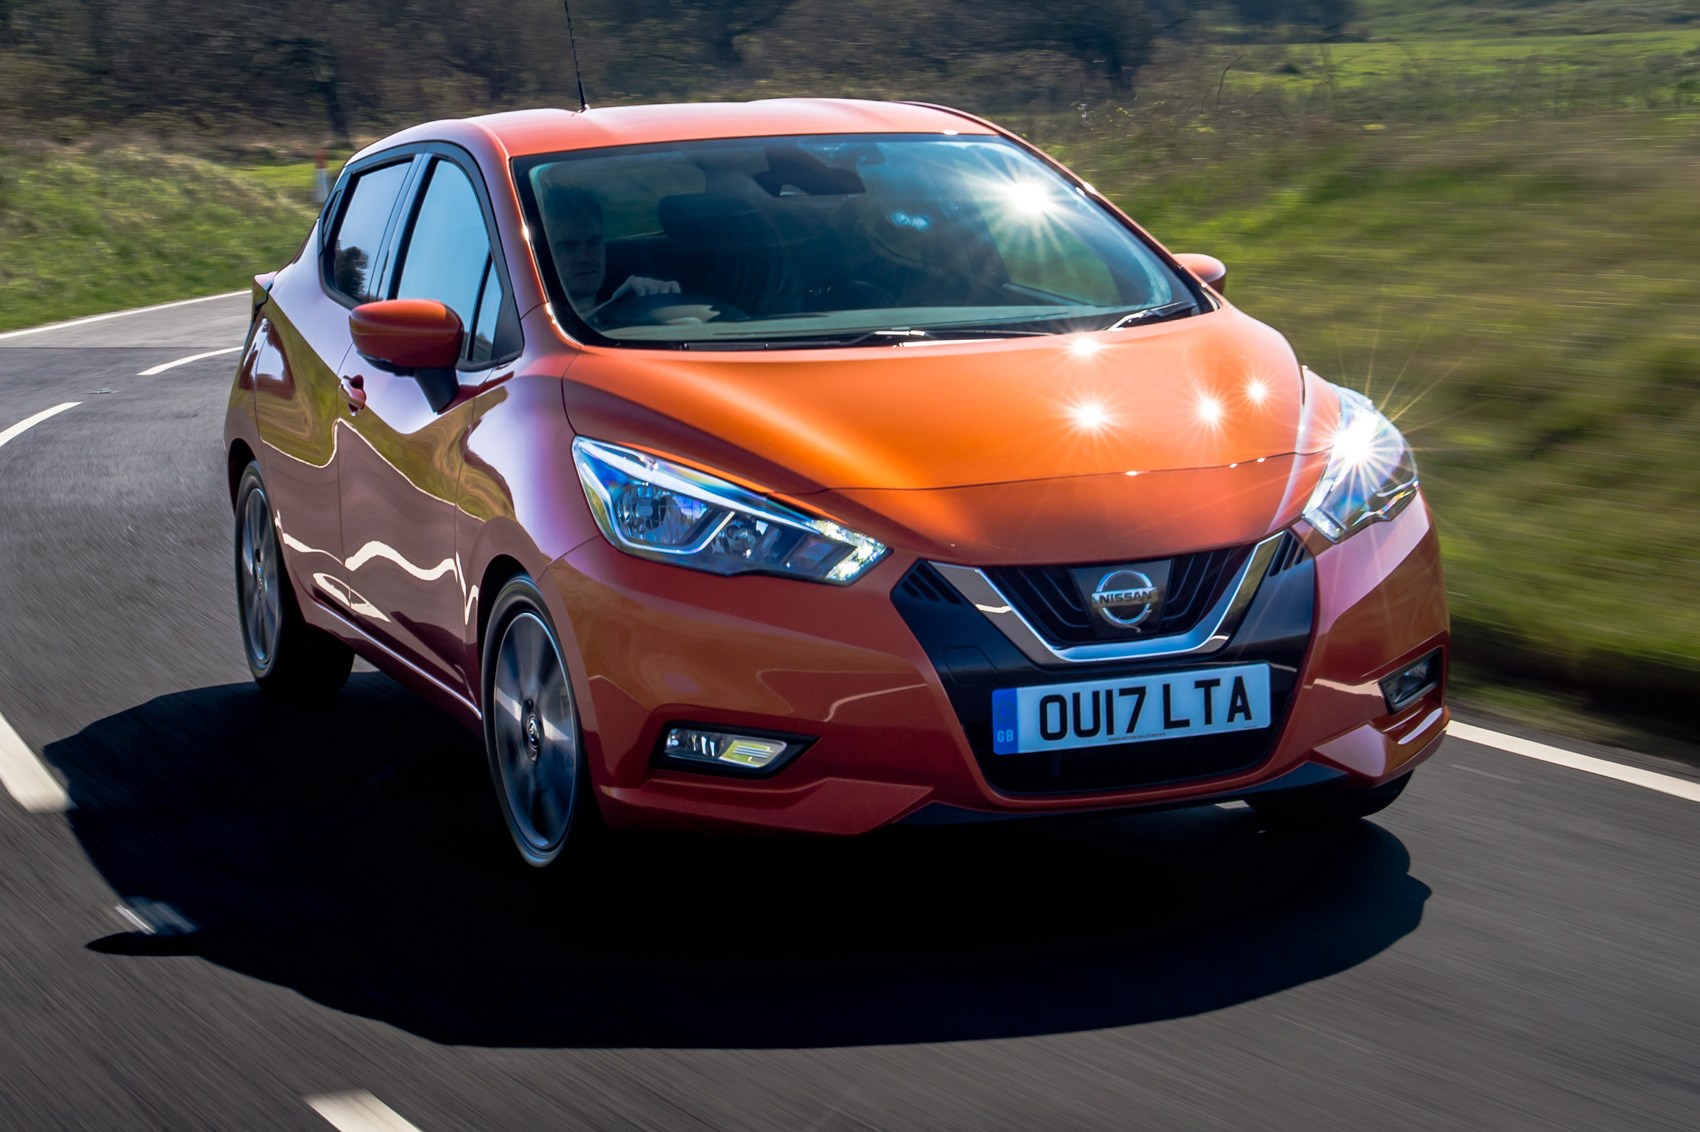 2018 Nissan Micra S Test Drive Review